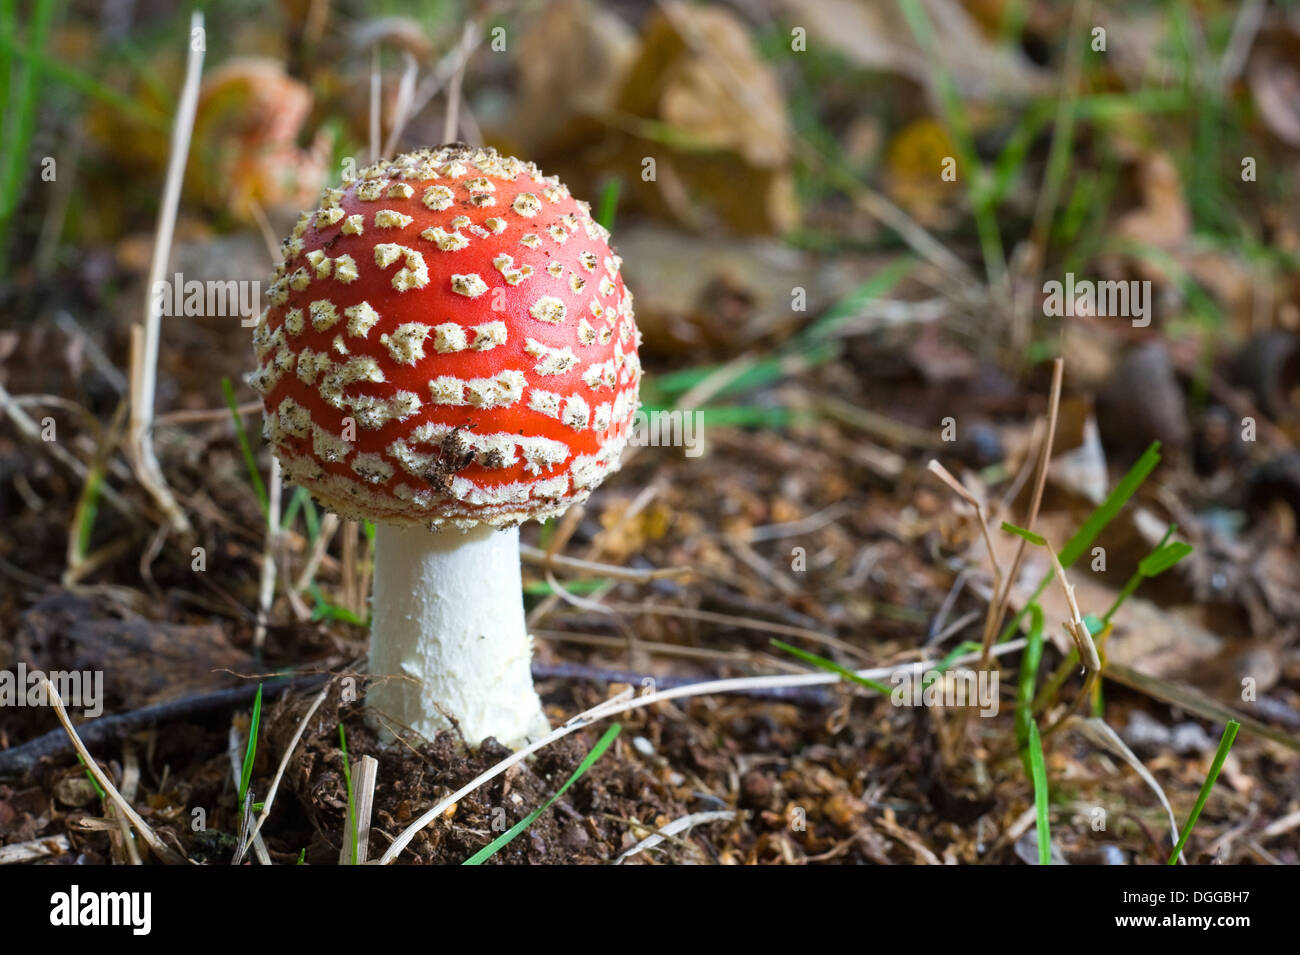 A amanita muscaria growing in a forest in the autumn Stock Photo